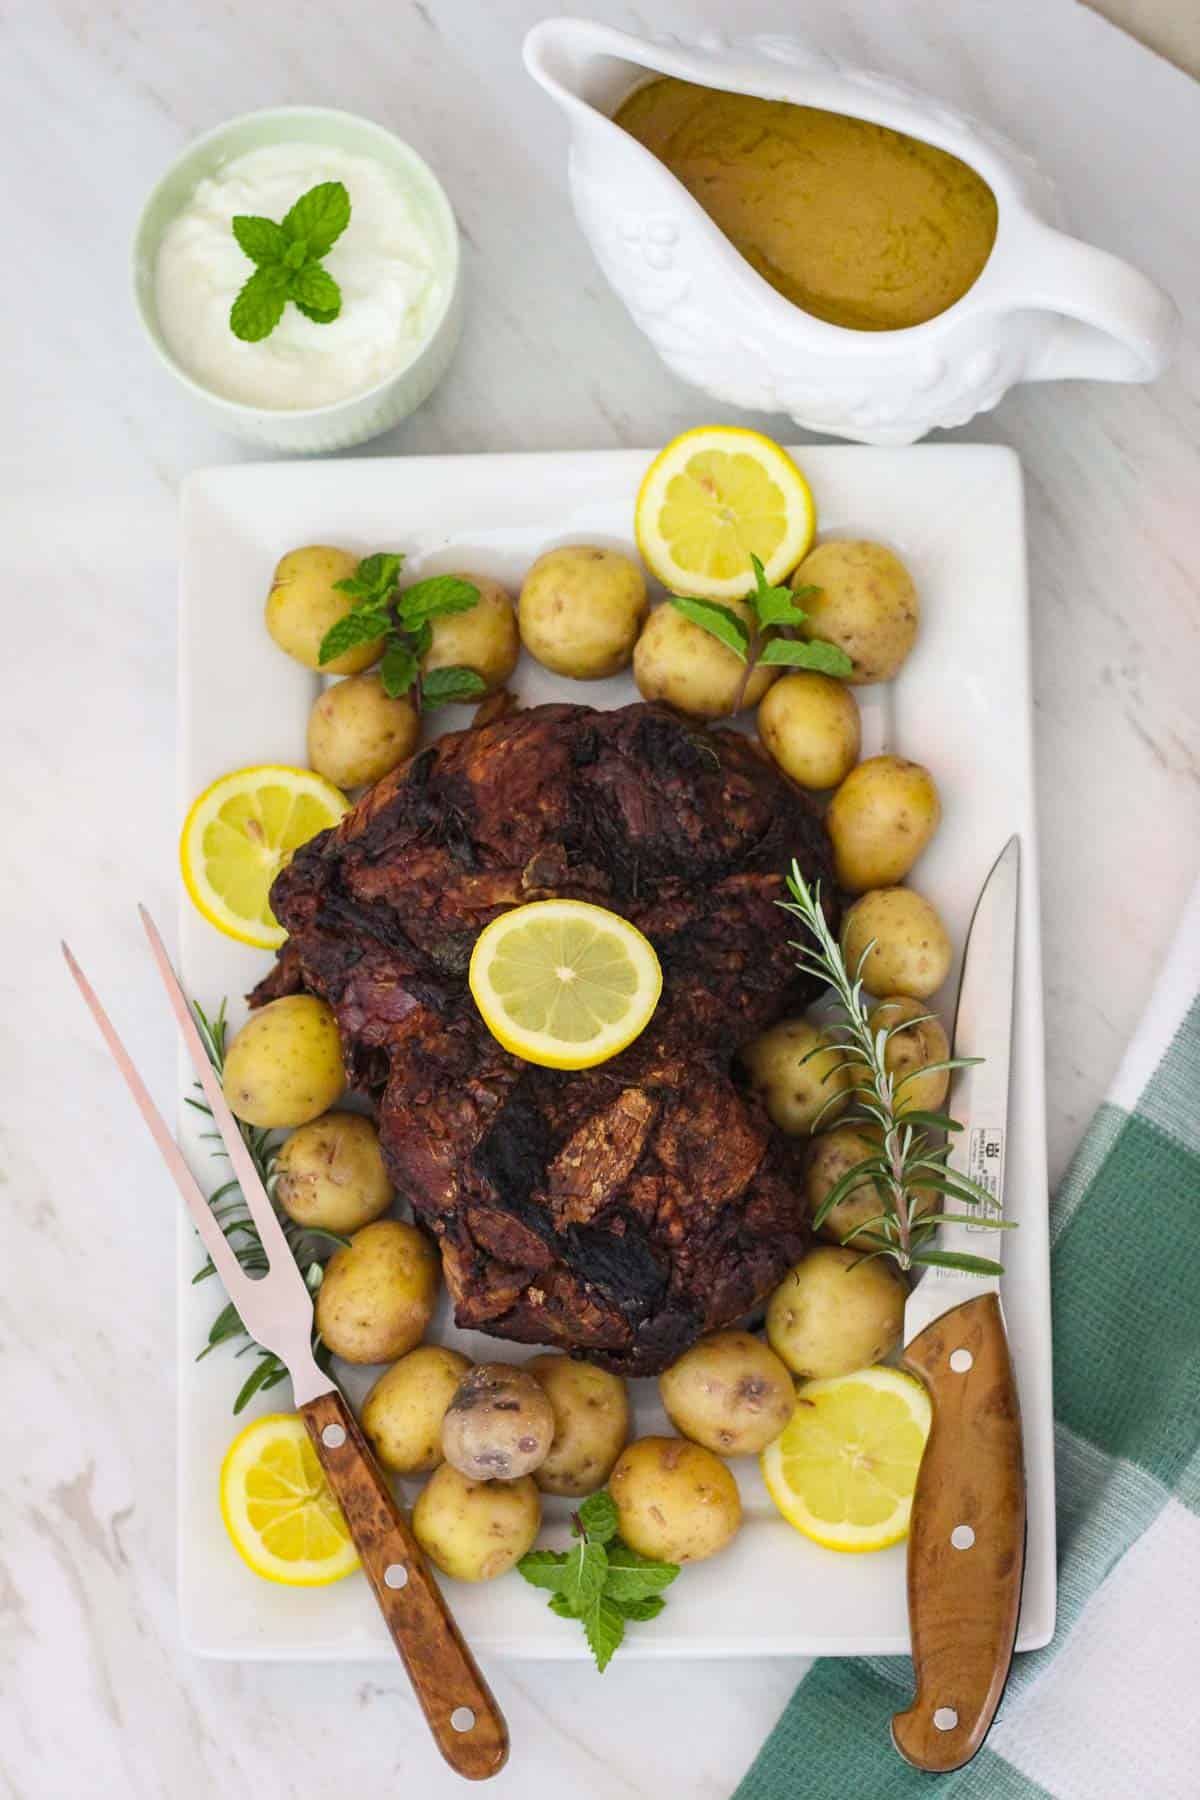 A platter with roasted lamb leg, potatoes, rosemary, lemon, cutting utensils, mint. Next to the platter there's a gravy jar and a yogurt dip.